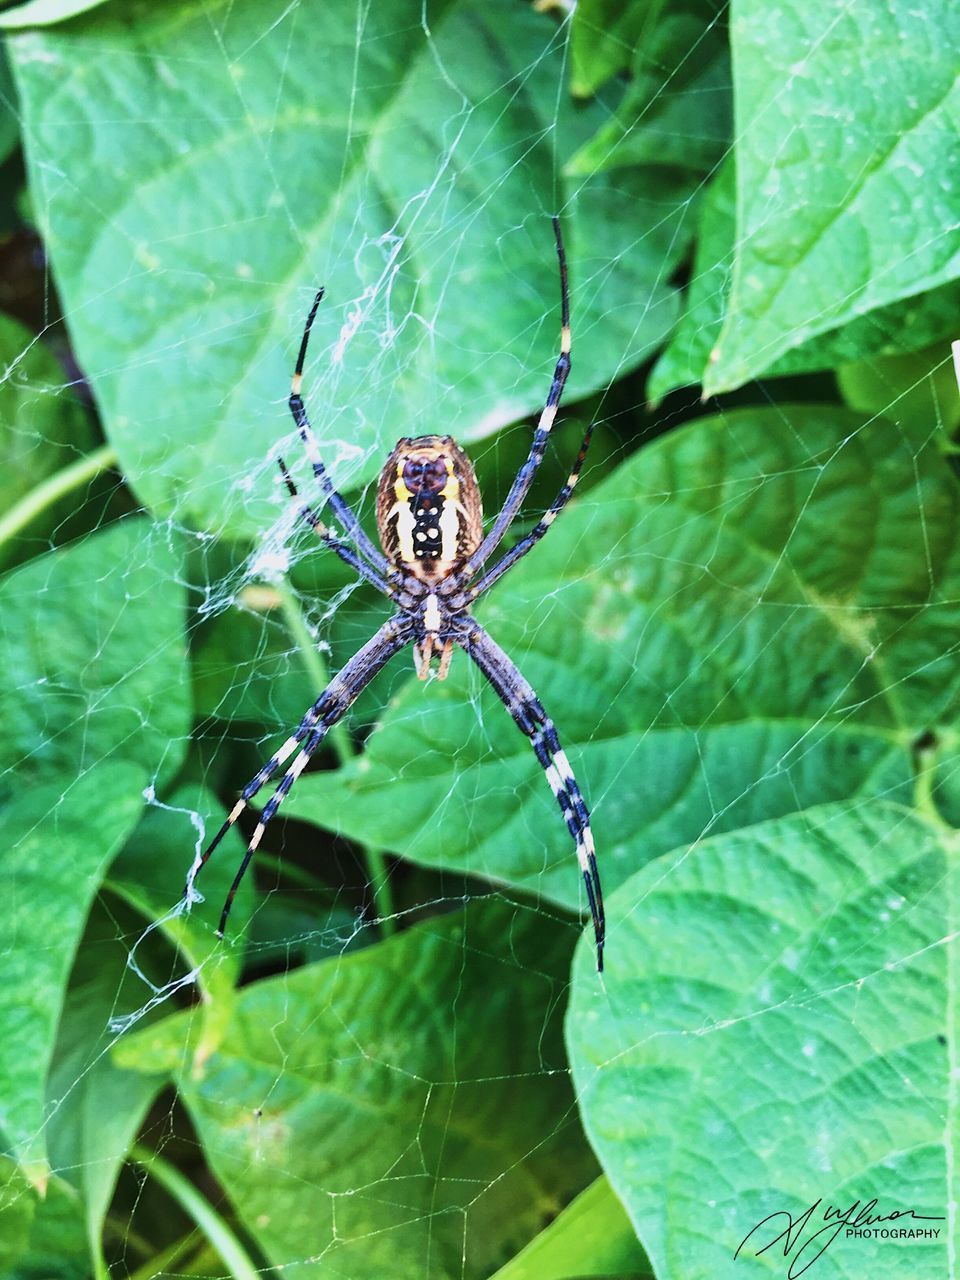 CLOSE-UP OF SPIDER ON WEB AGAINST GREEN PLANTS